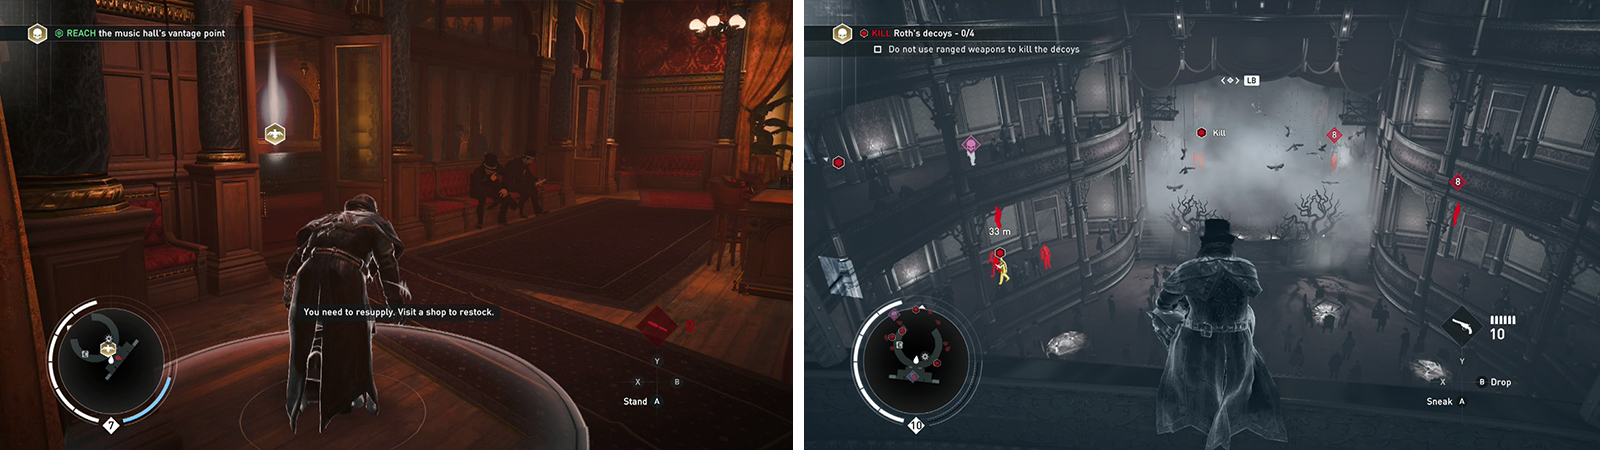 Sneak to the top floor to reach the vantage point (left). Here you can investigate the remaning opportunities (right).